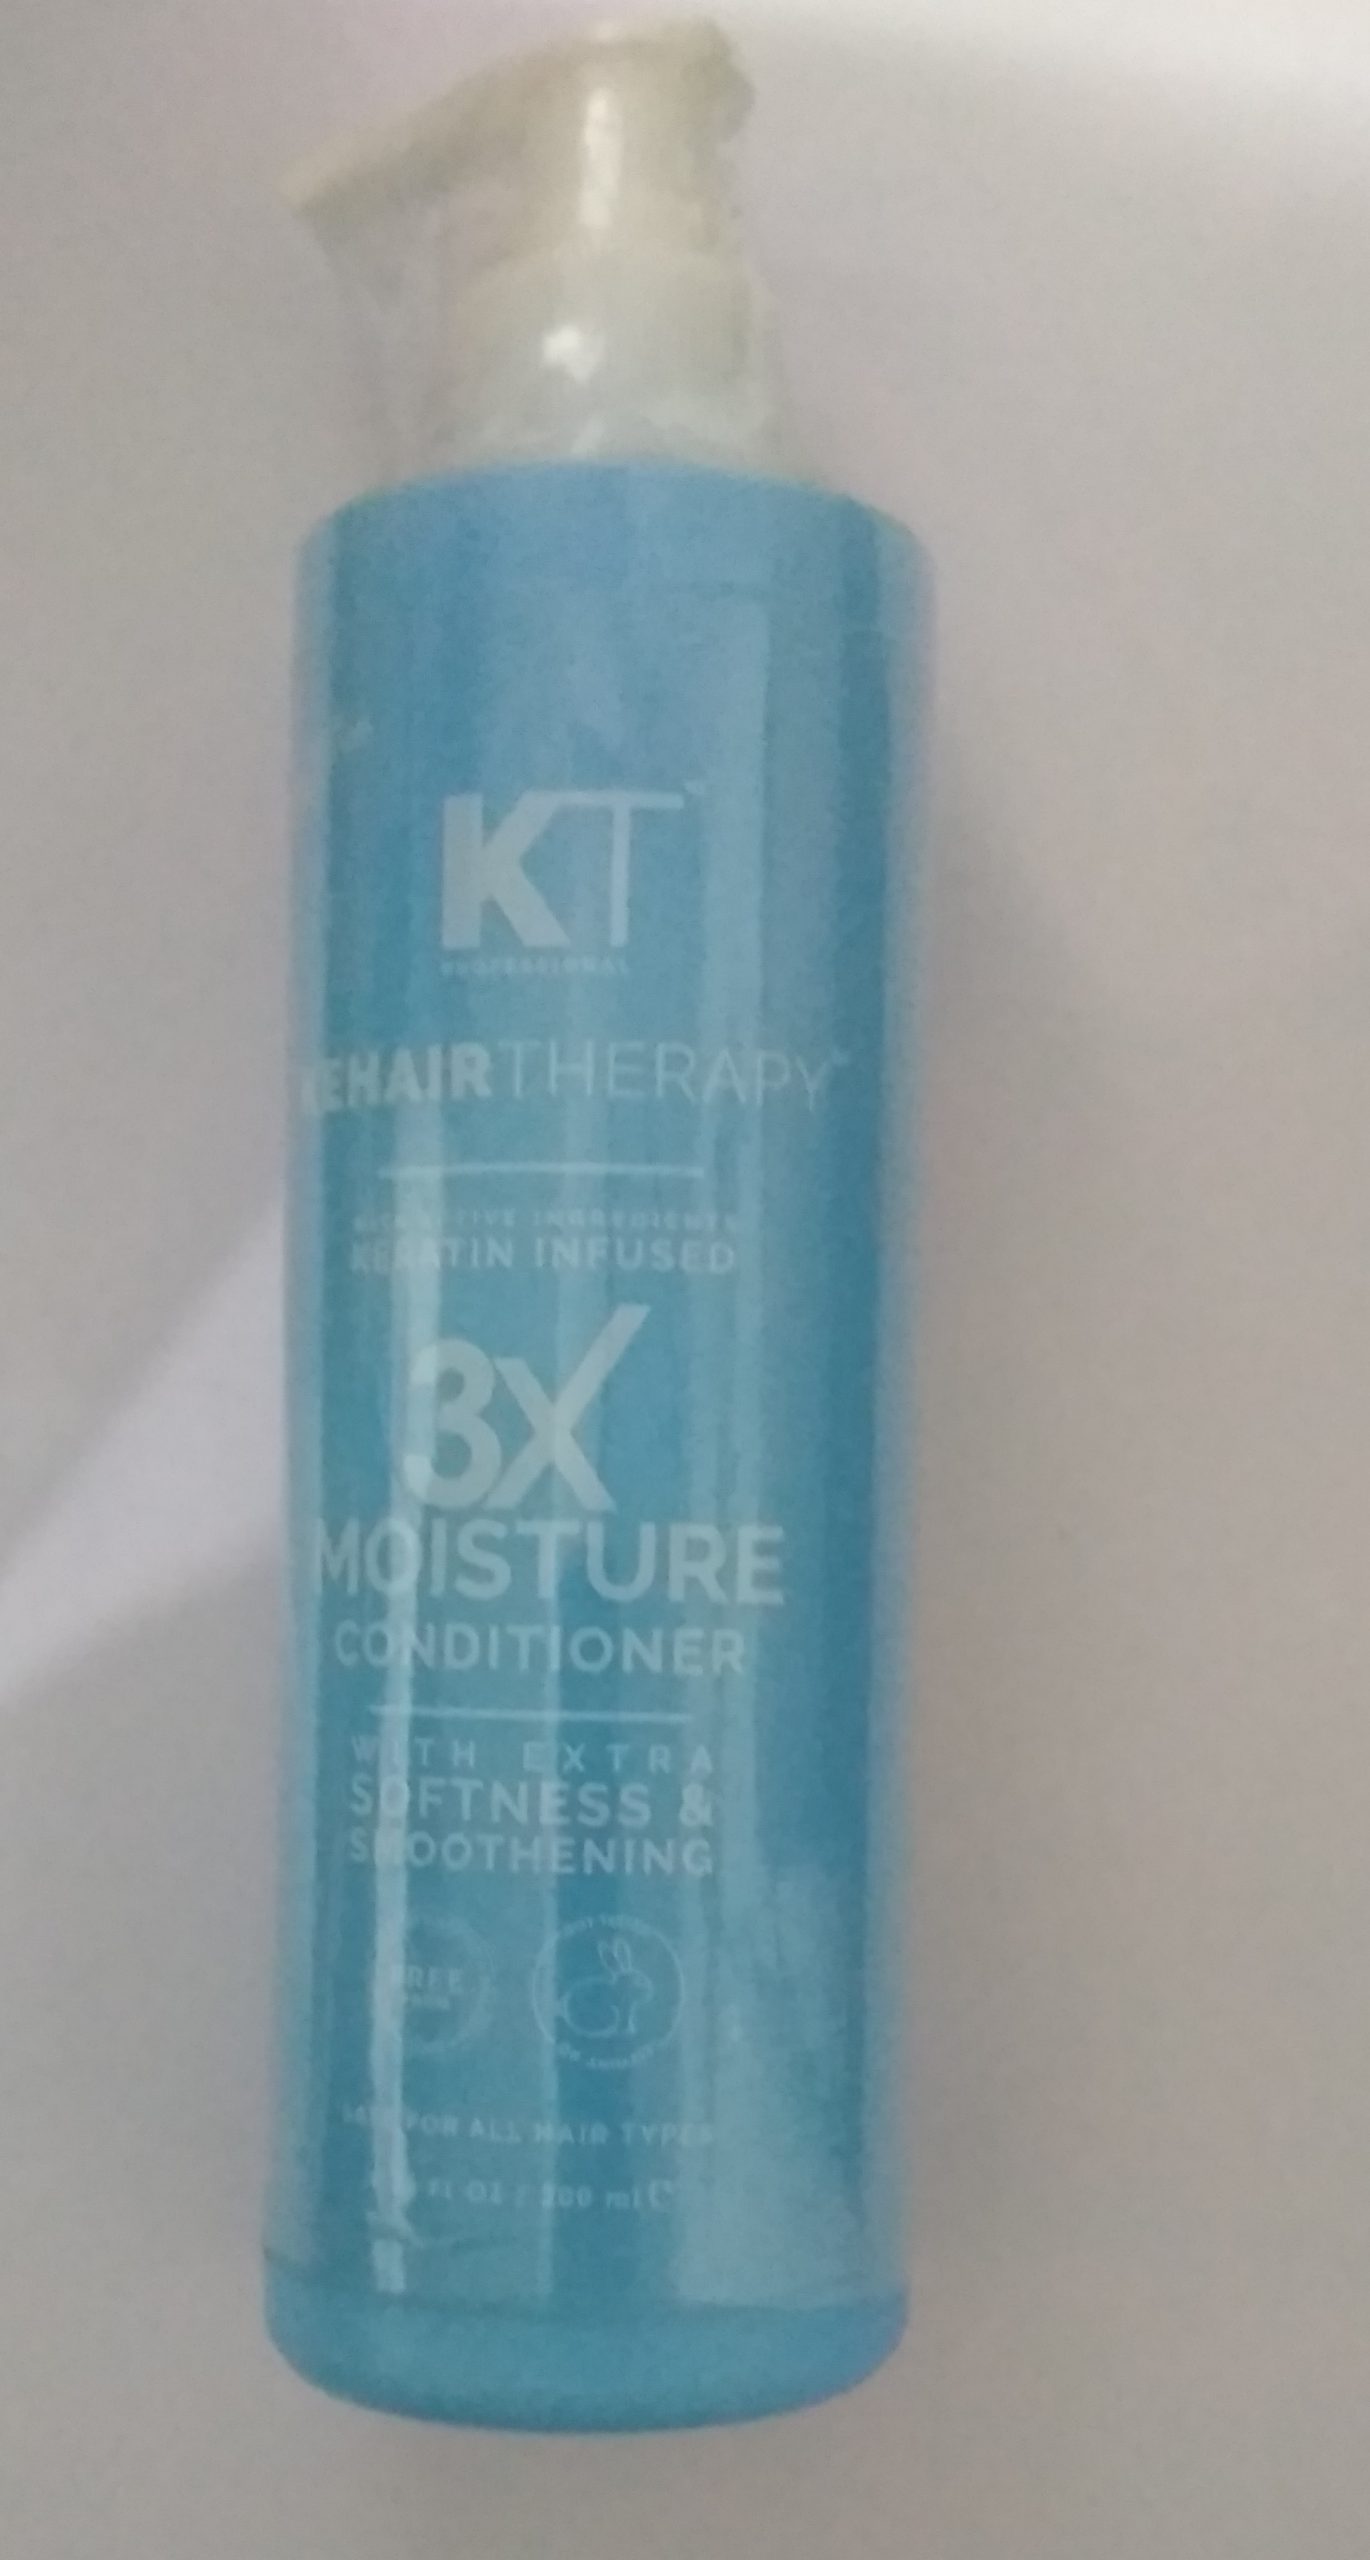 KT Professional Kehairtherapy Sulfate-free 3X Moisture conditioner 200ml